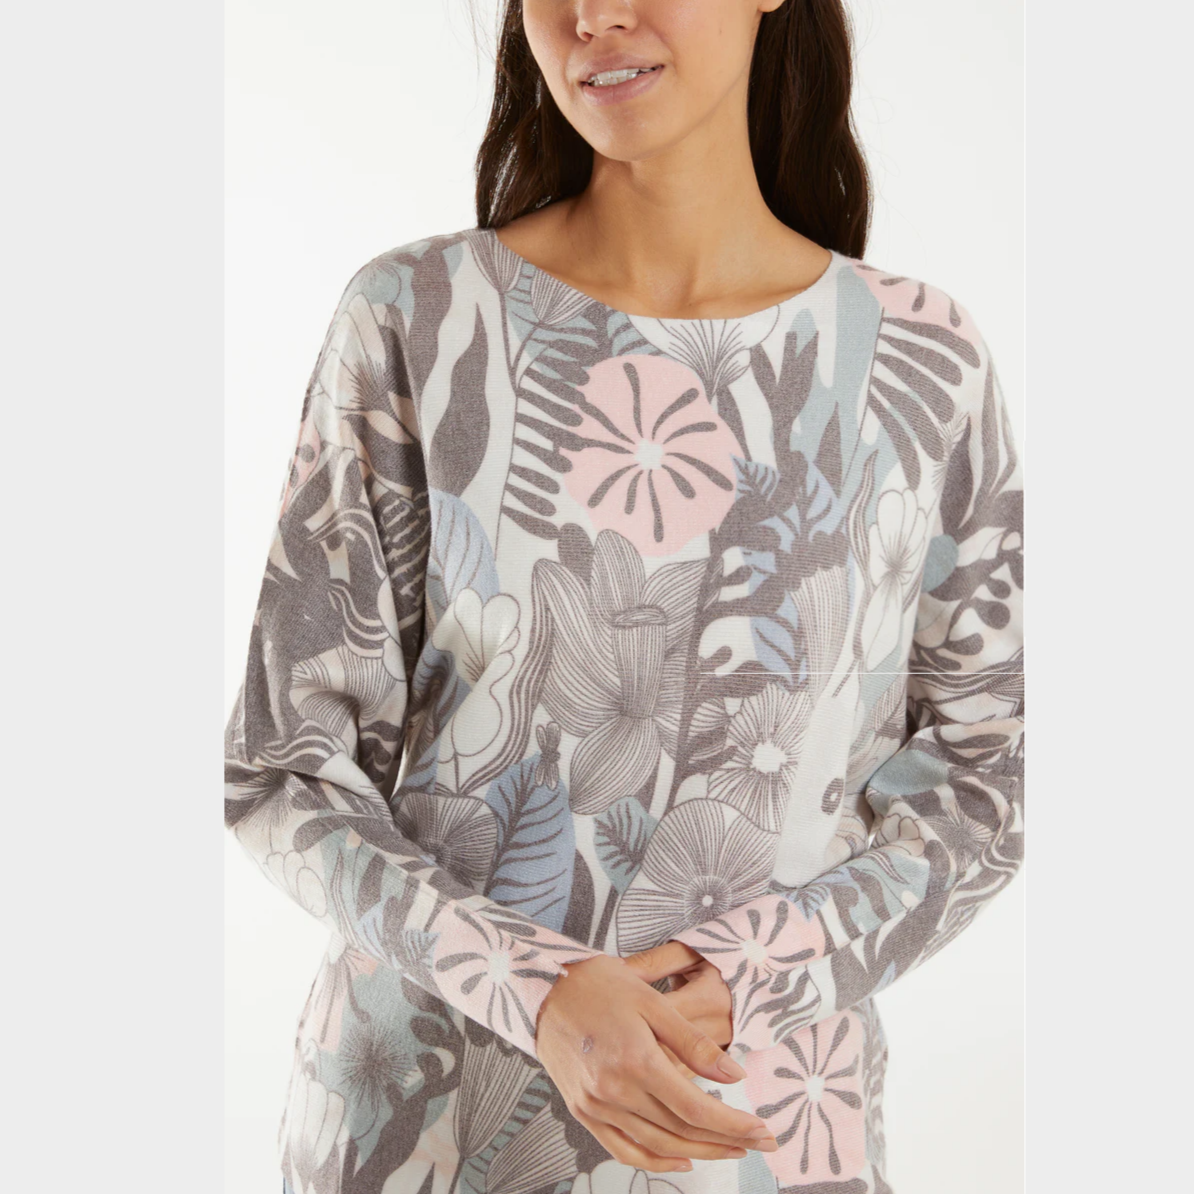 Paramour Muted tones floral jumper